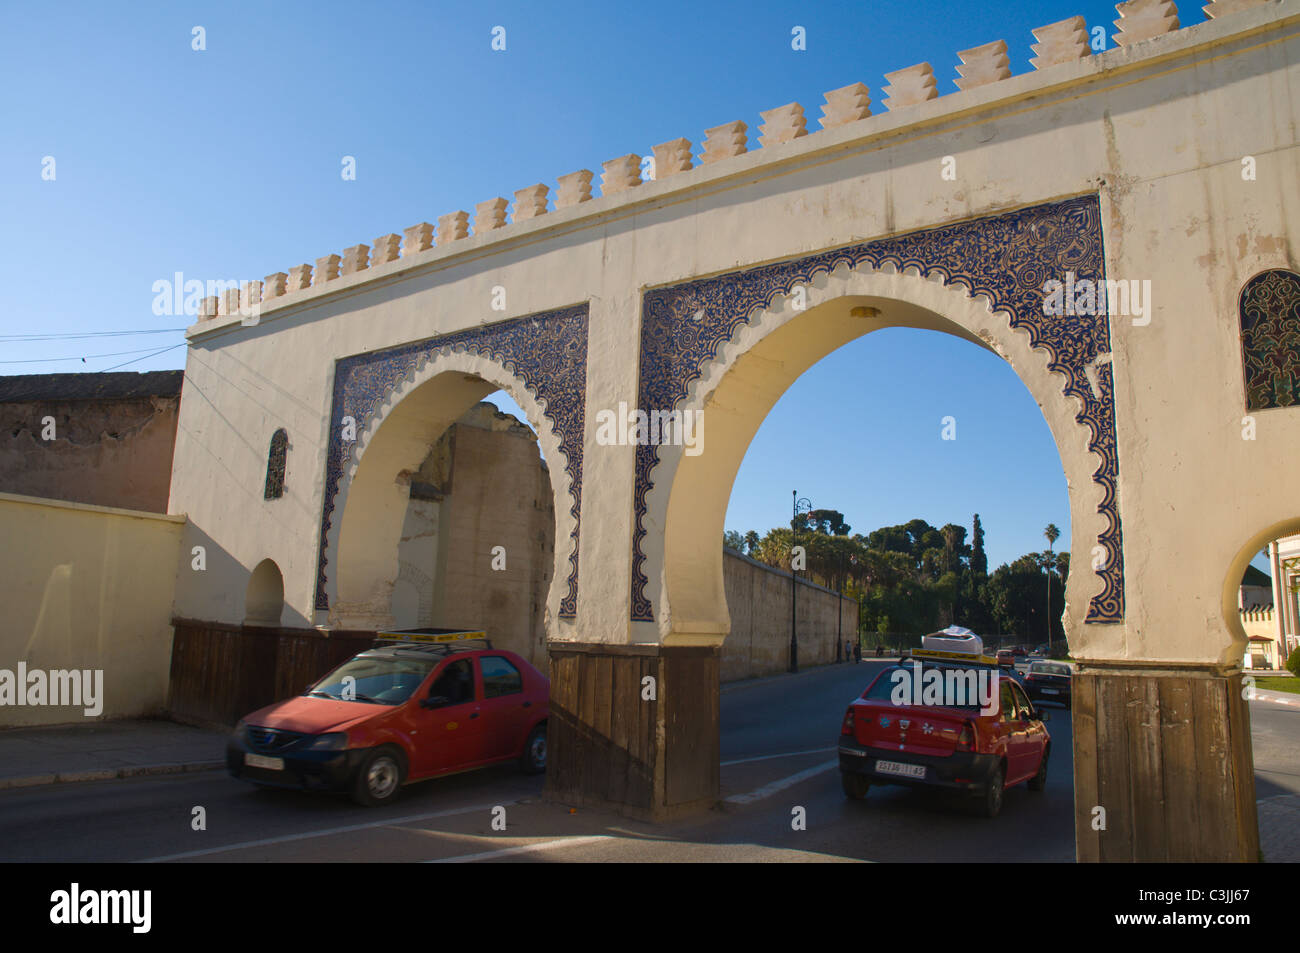 Petit taxis on Avenue de l'Unesco street Medina old town Fez northern Morocco Africa Stock Photo